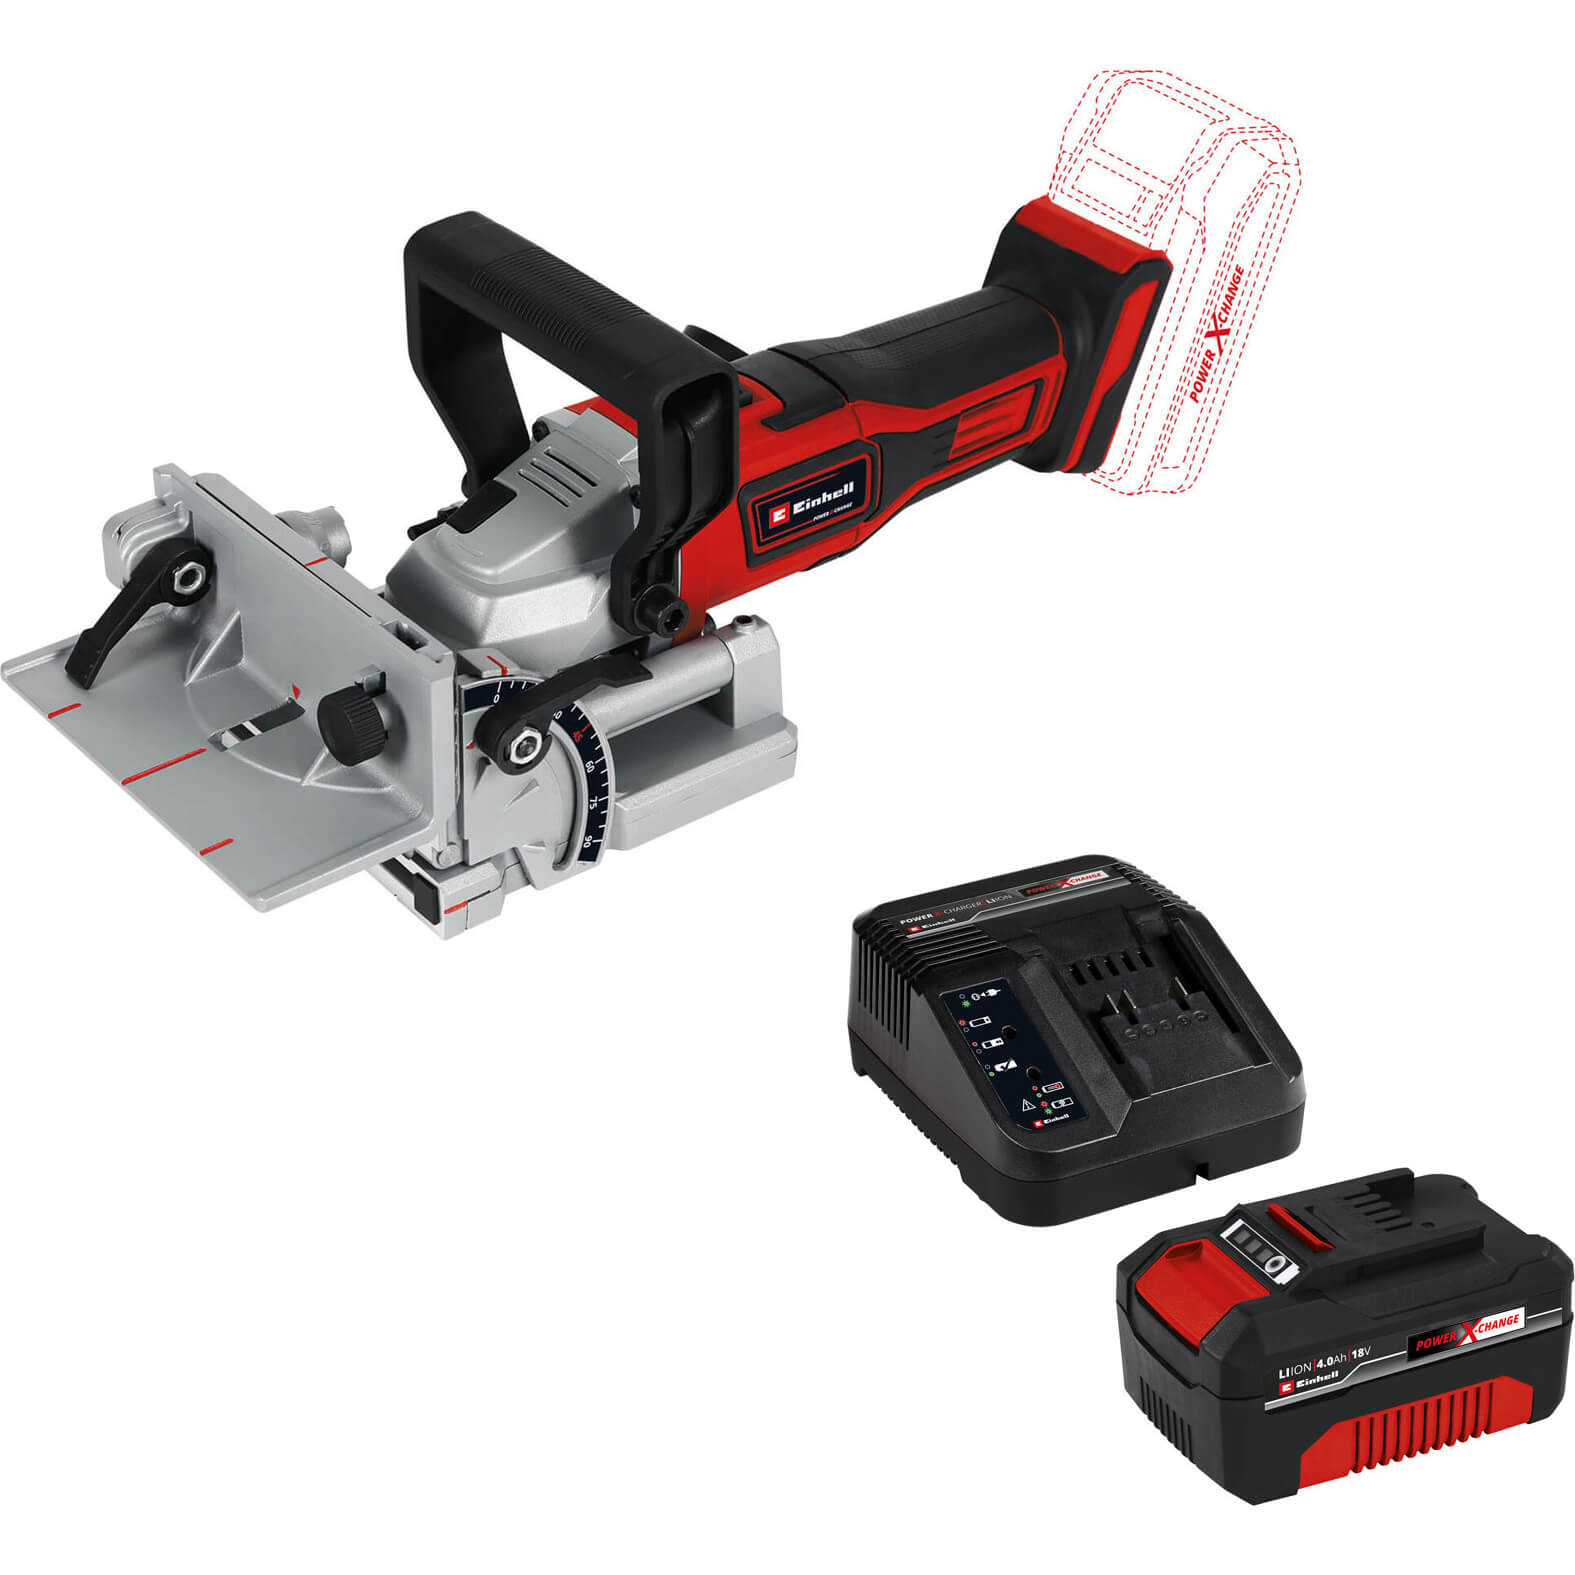 Image of Einhell TE-BJ 18 Li 18v Cordless Biscuit Jointer 1 x 4ah Li-ion Charger No Case